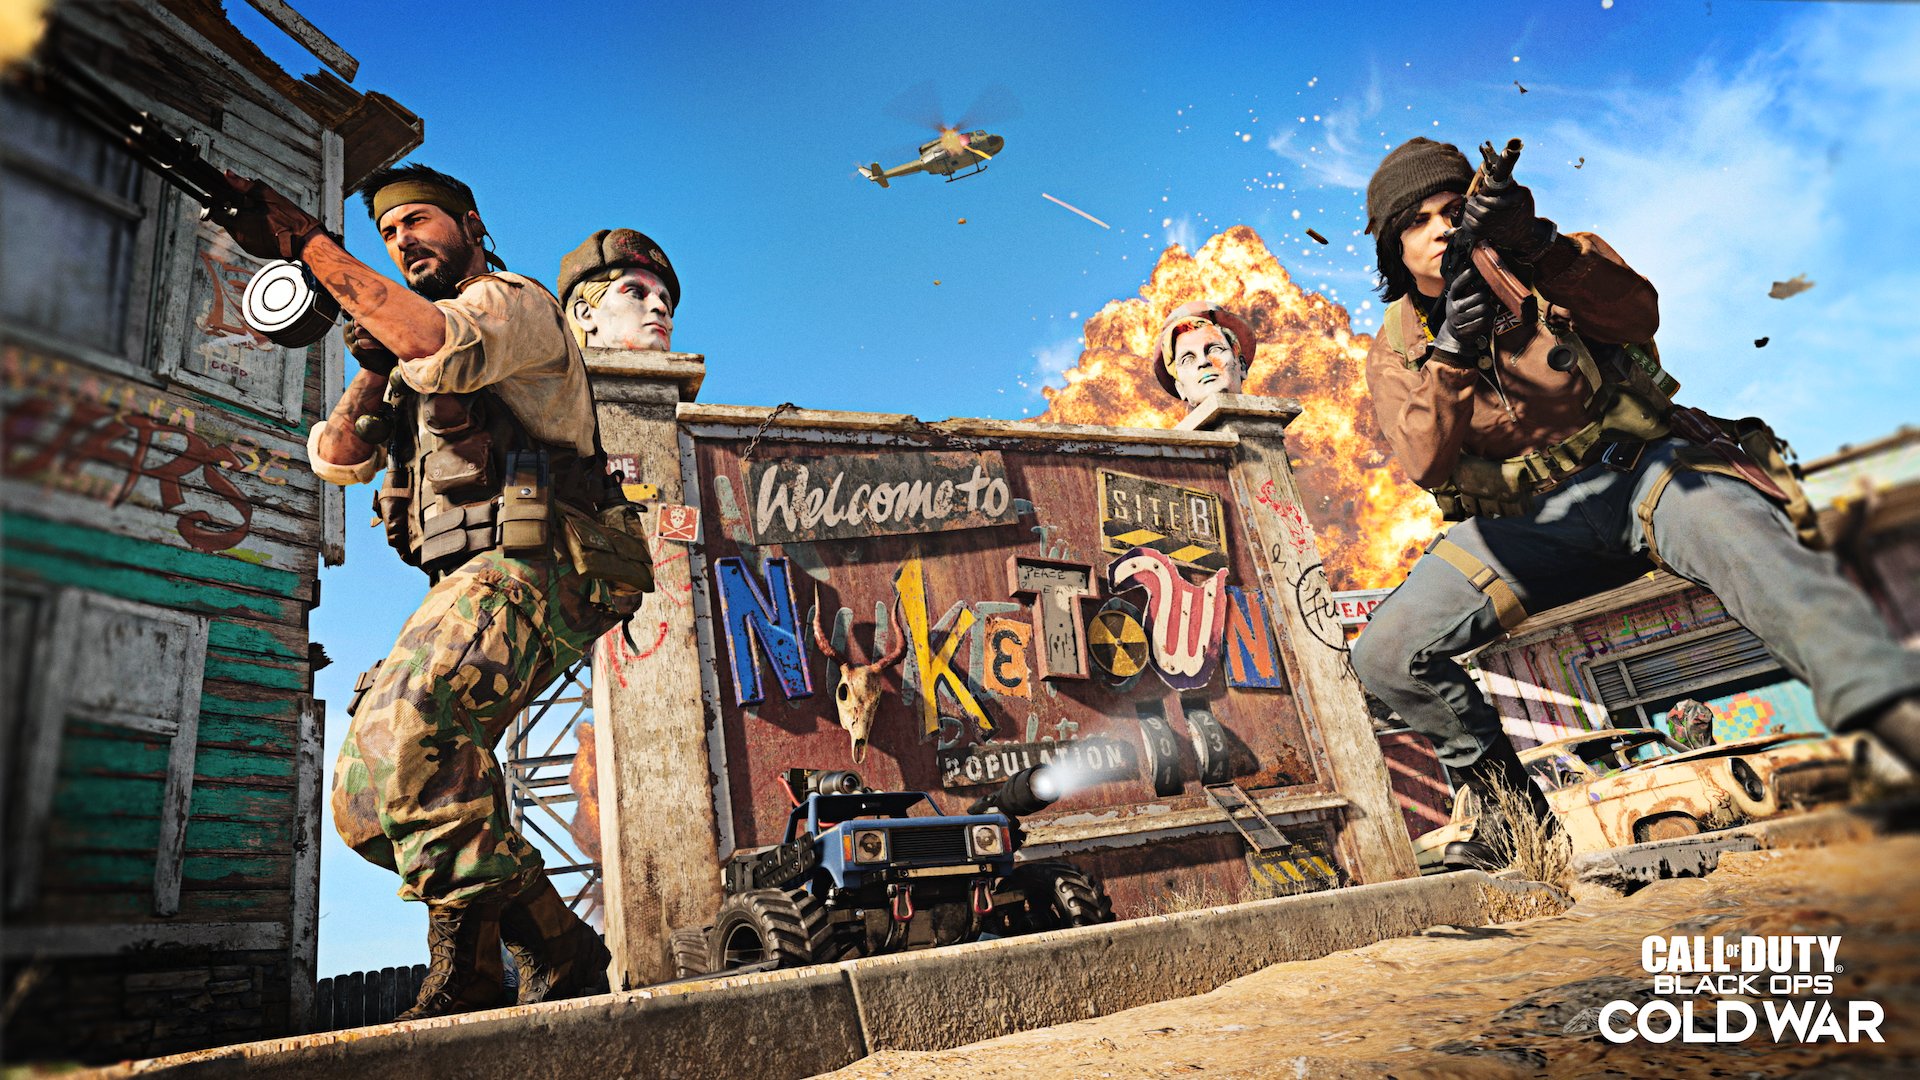  The latest version of Call of Duty's iconic Nuketown map has a somewhat ironic anti-war message 